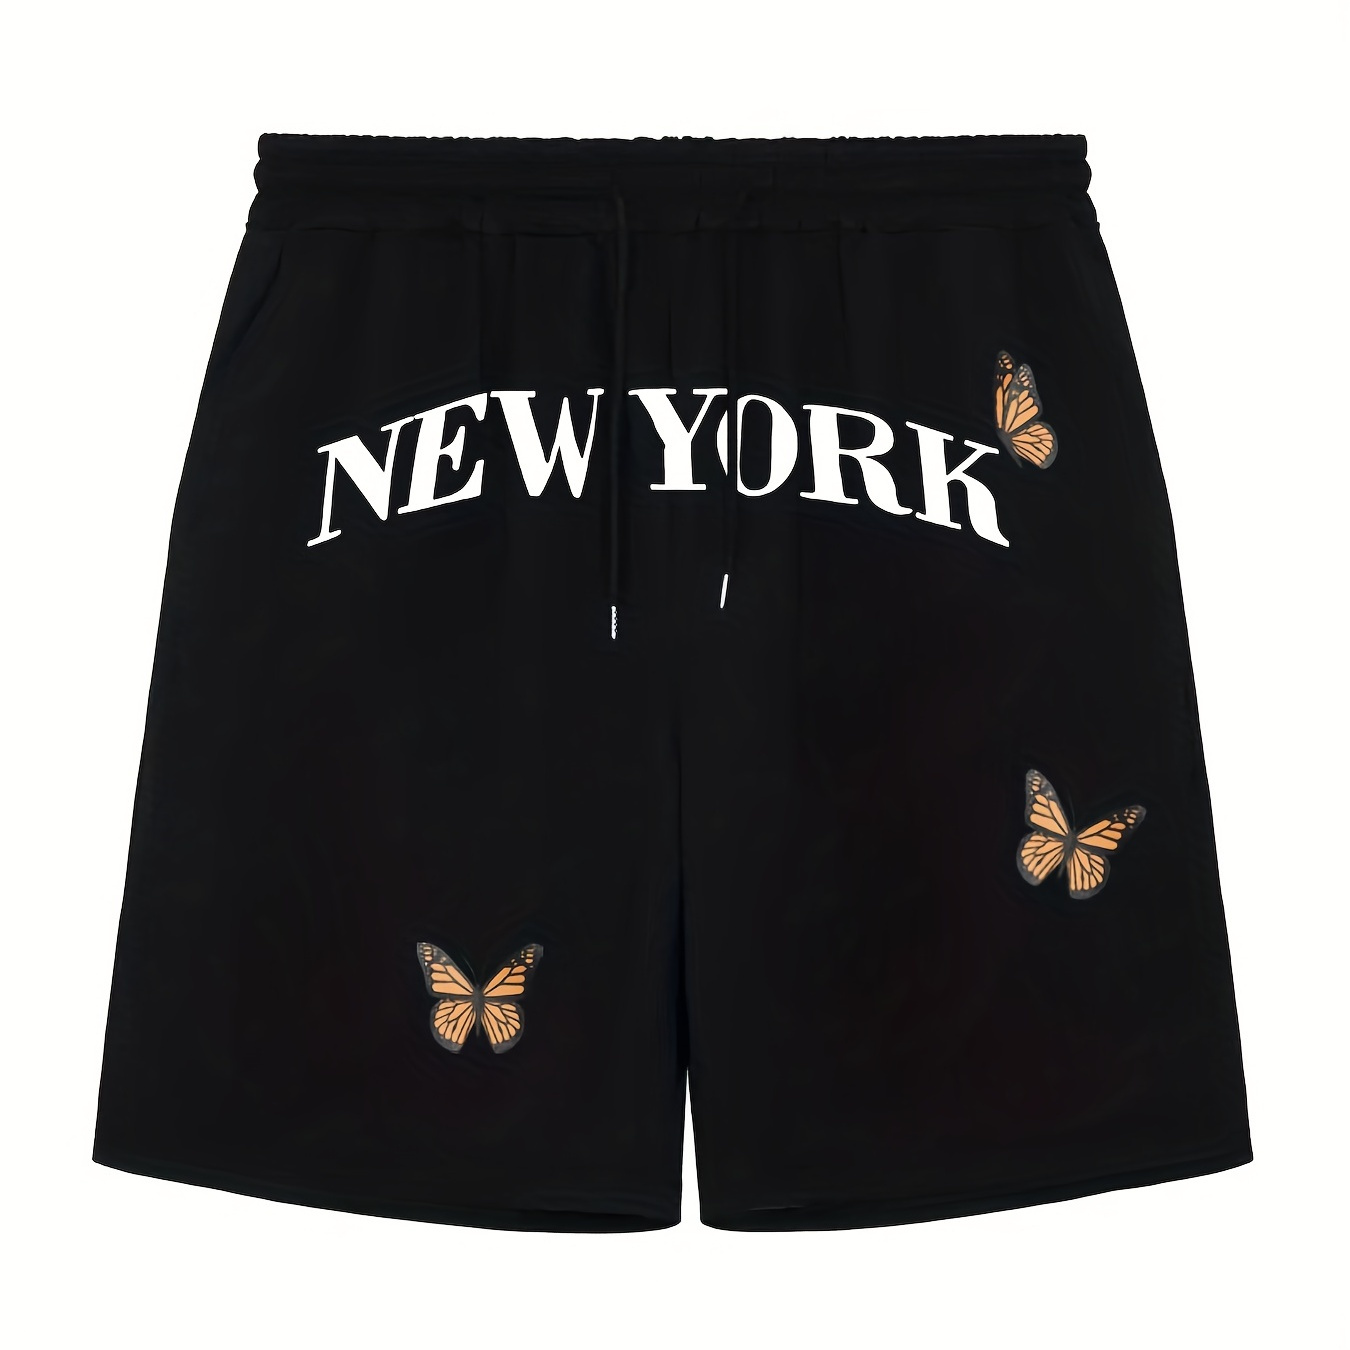 

new York" Butterfly Comfy Shorts, Men's Casual Solid Color Slightly Stretch Elastic Waist Drawstring Shorts For Summer